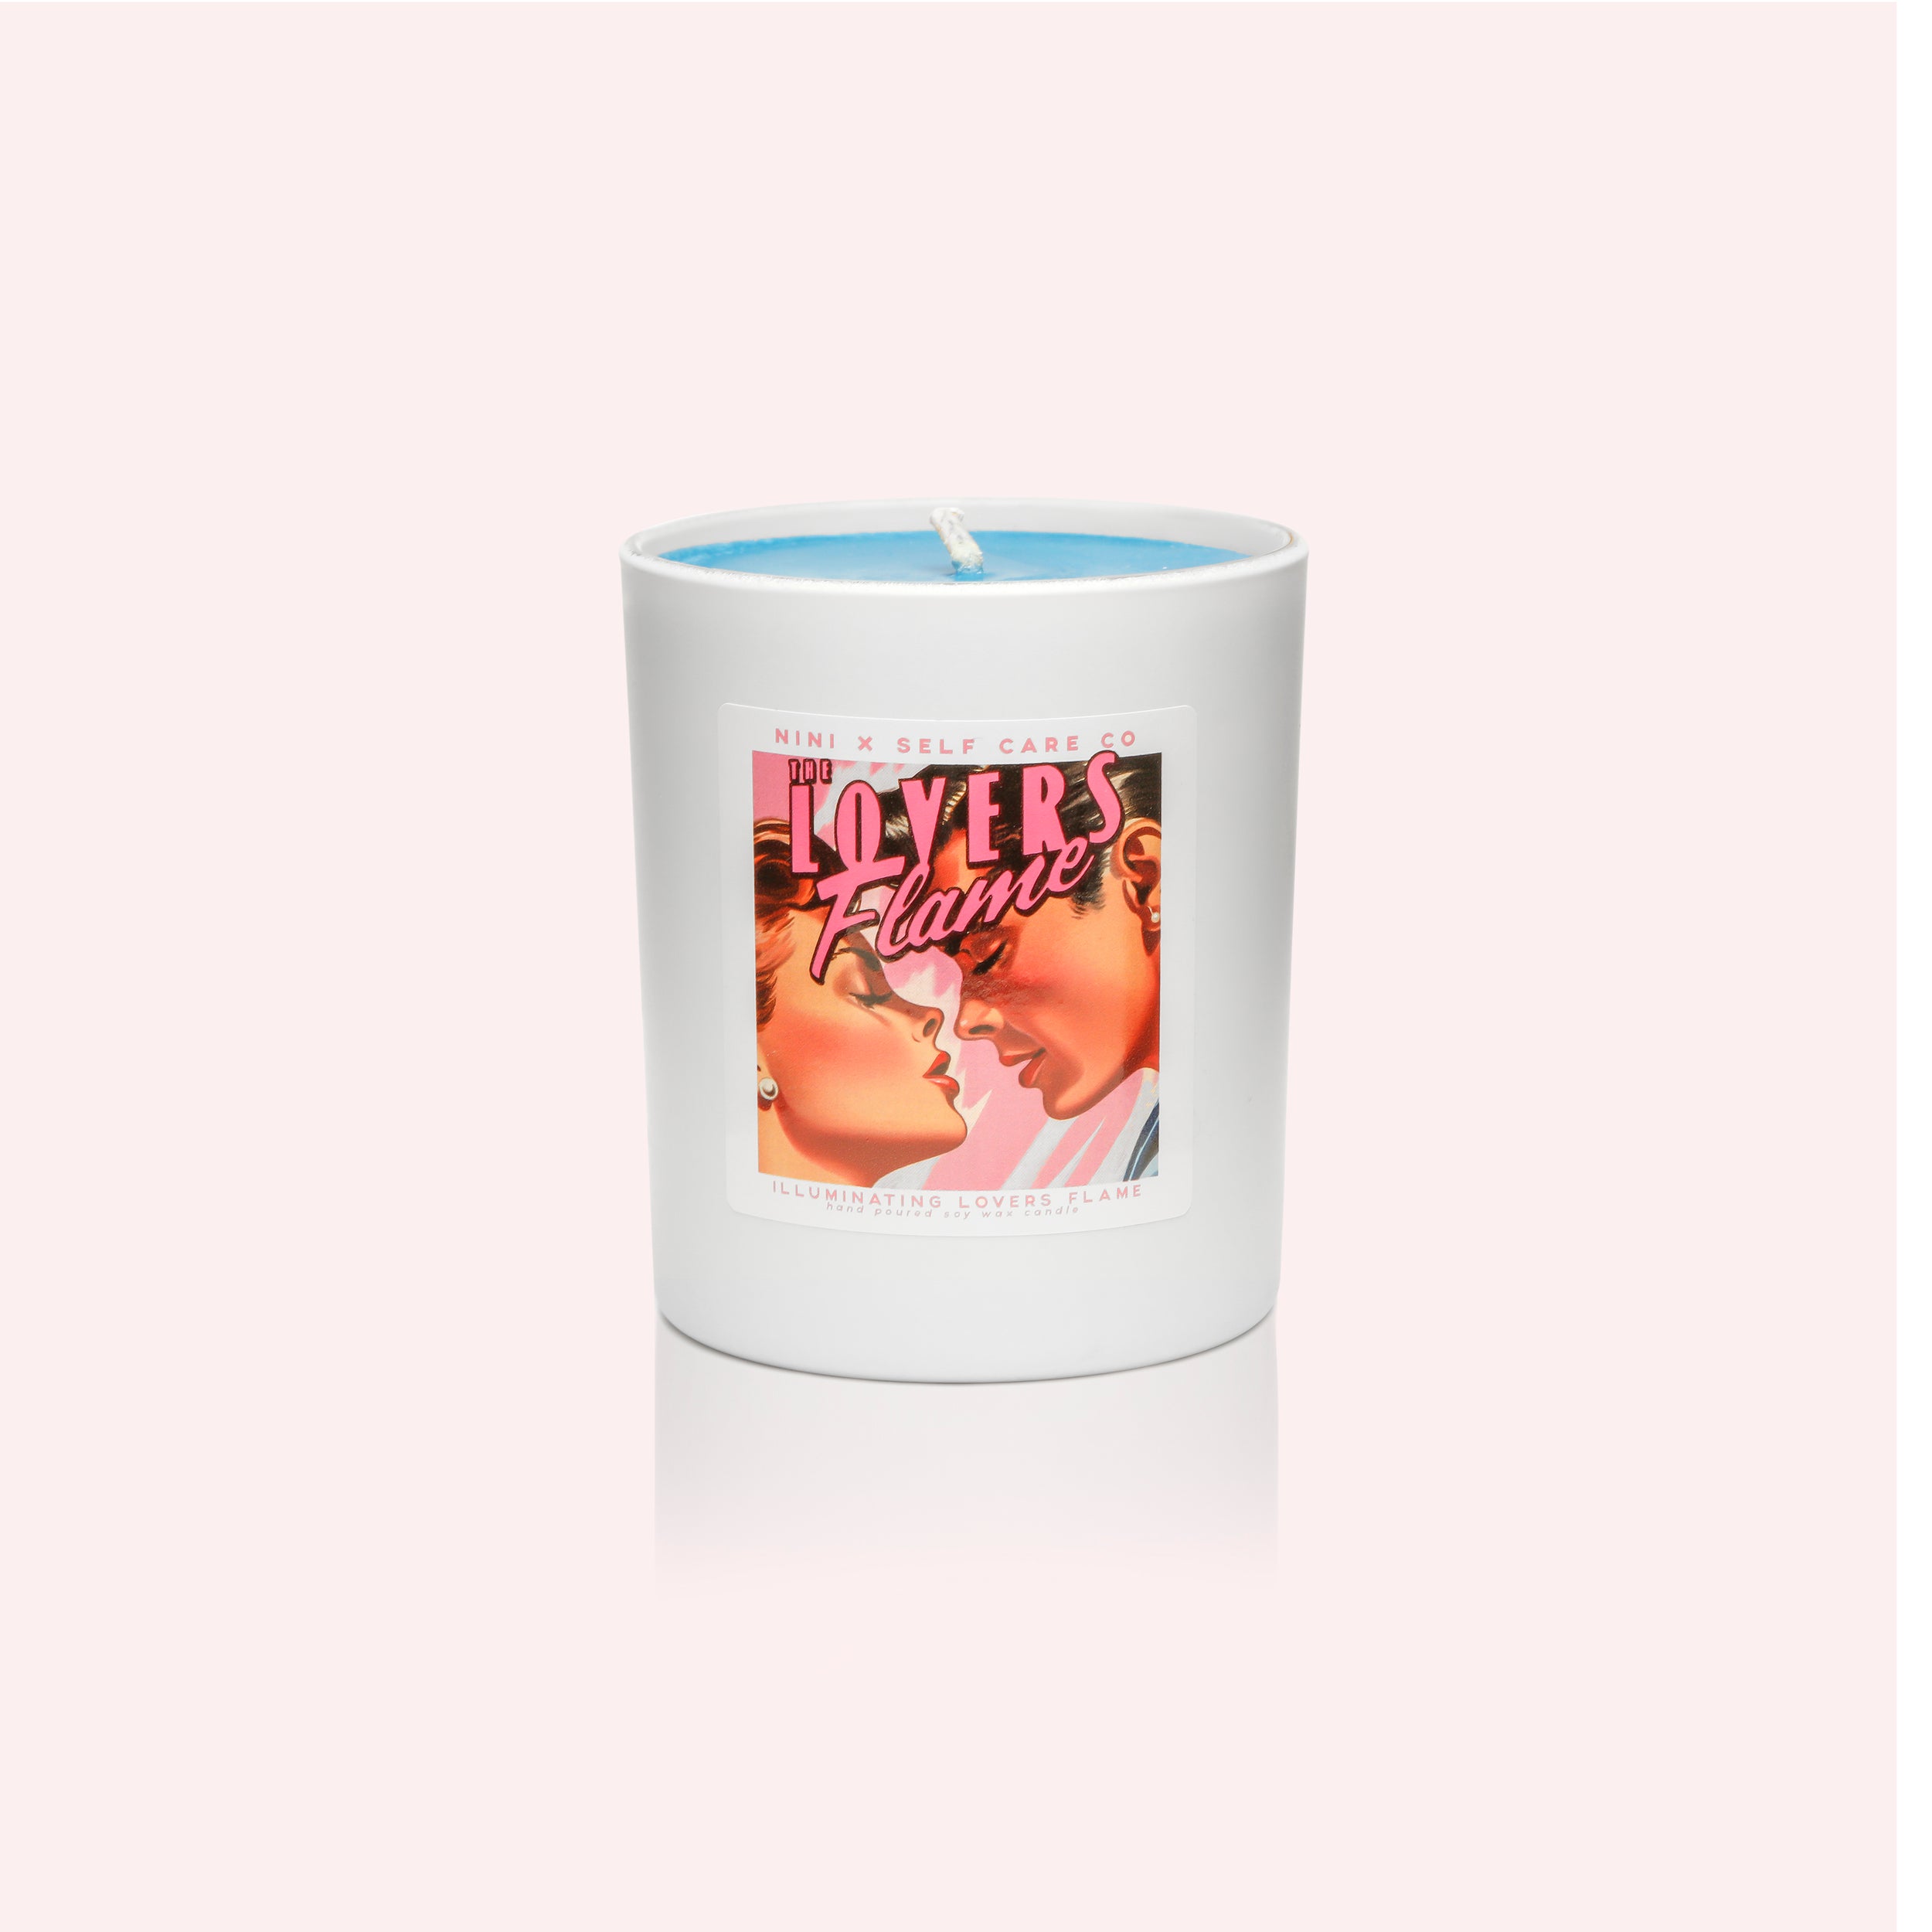 The Lovers Flame Candle - Limited edition